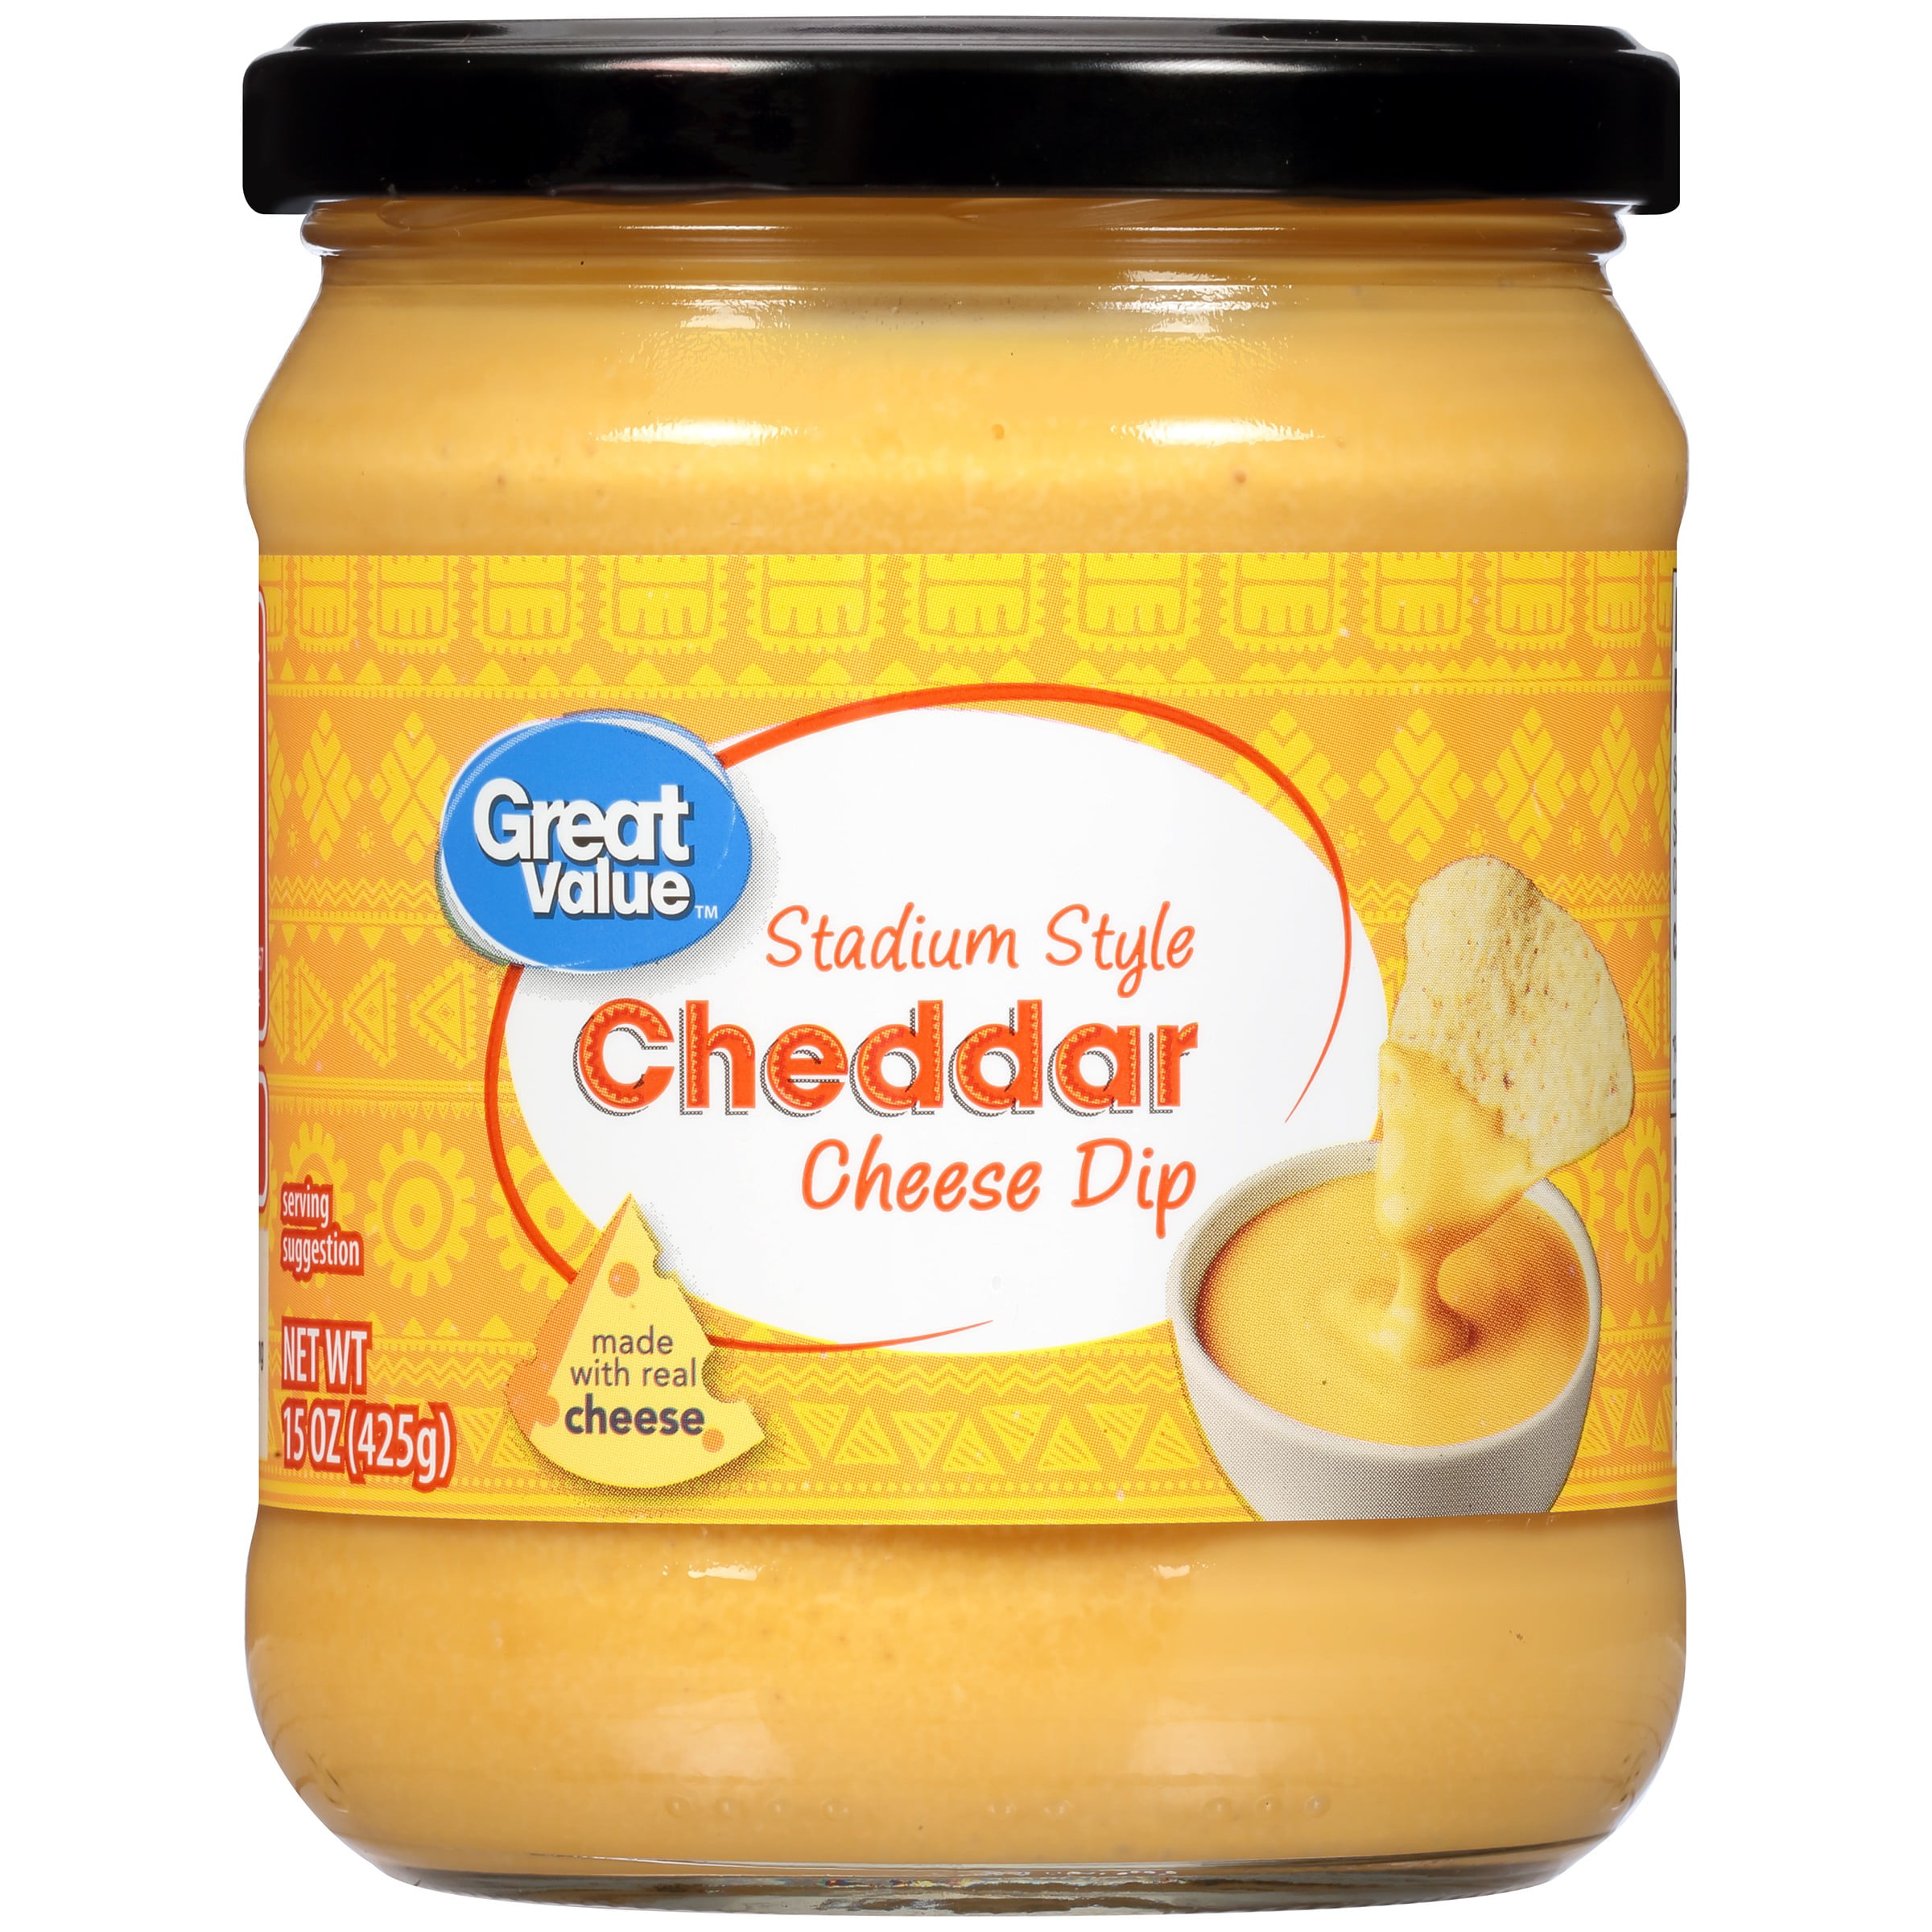 (4 Pack) Great Value Stadium Style Cheddar Cheese Dip, 15 oz - Walmart.com How To Pack A Can Of Dip